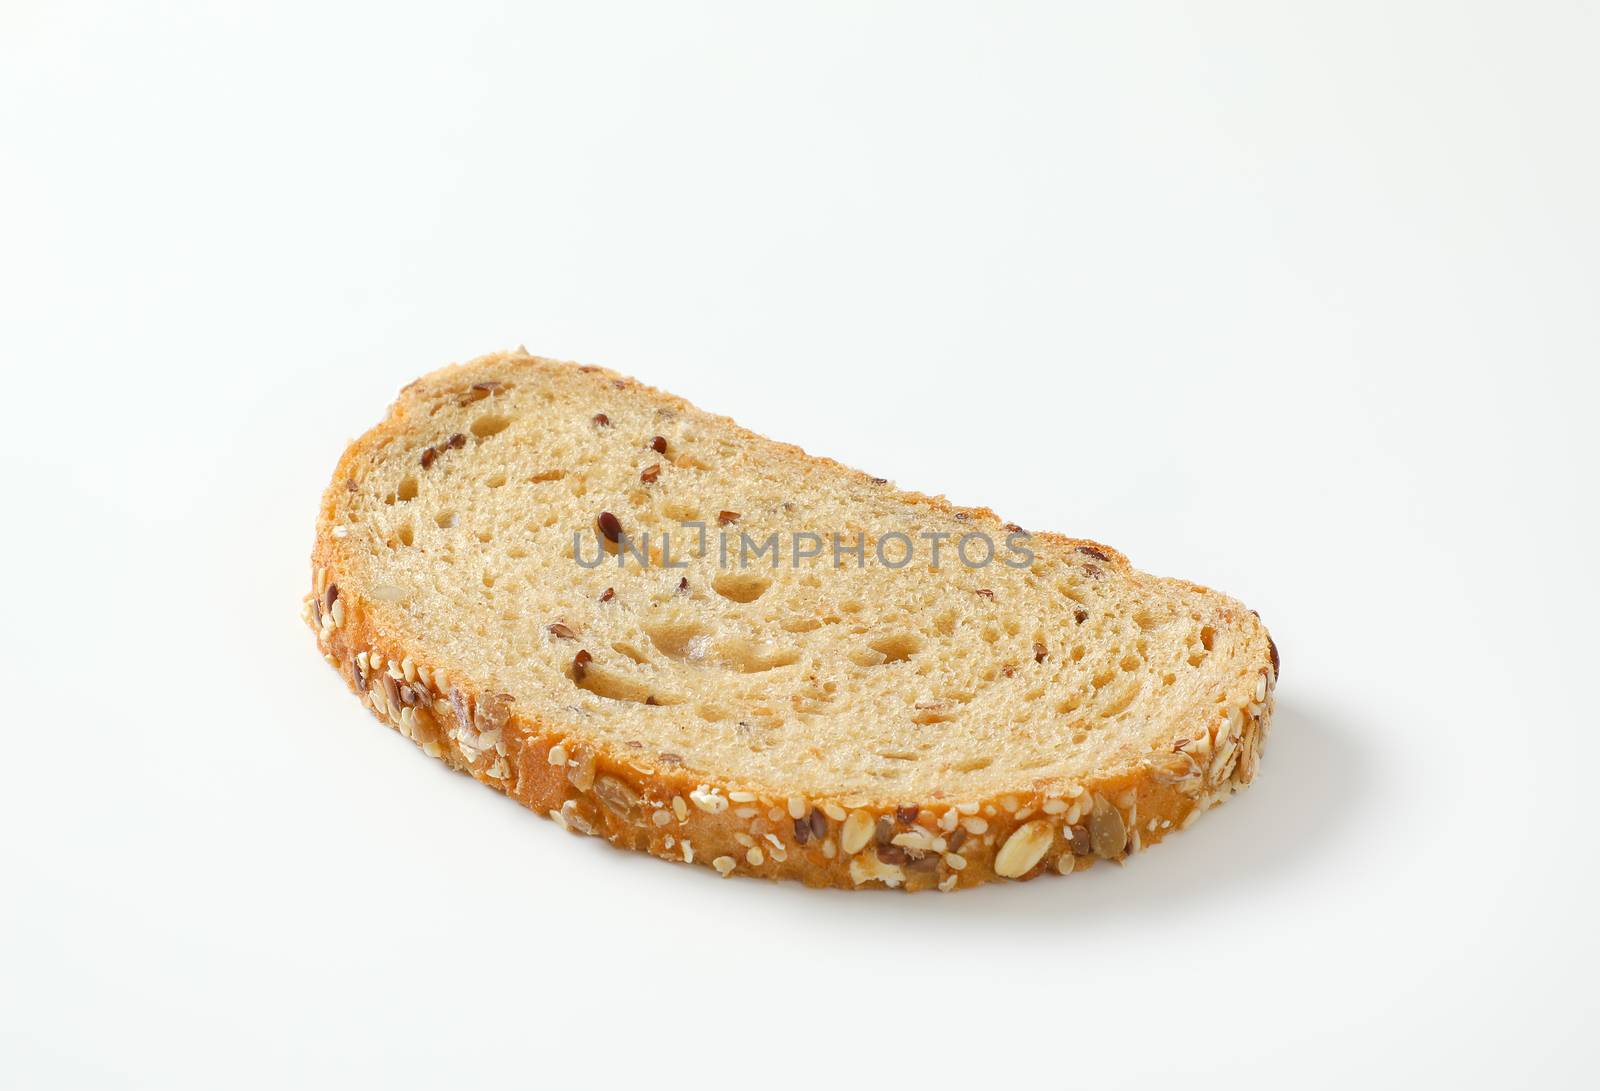 Slice of whole grain bread, crust topped with rolled oats and seeds (flax, sesame, sunflower)